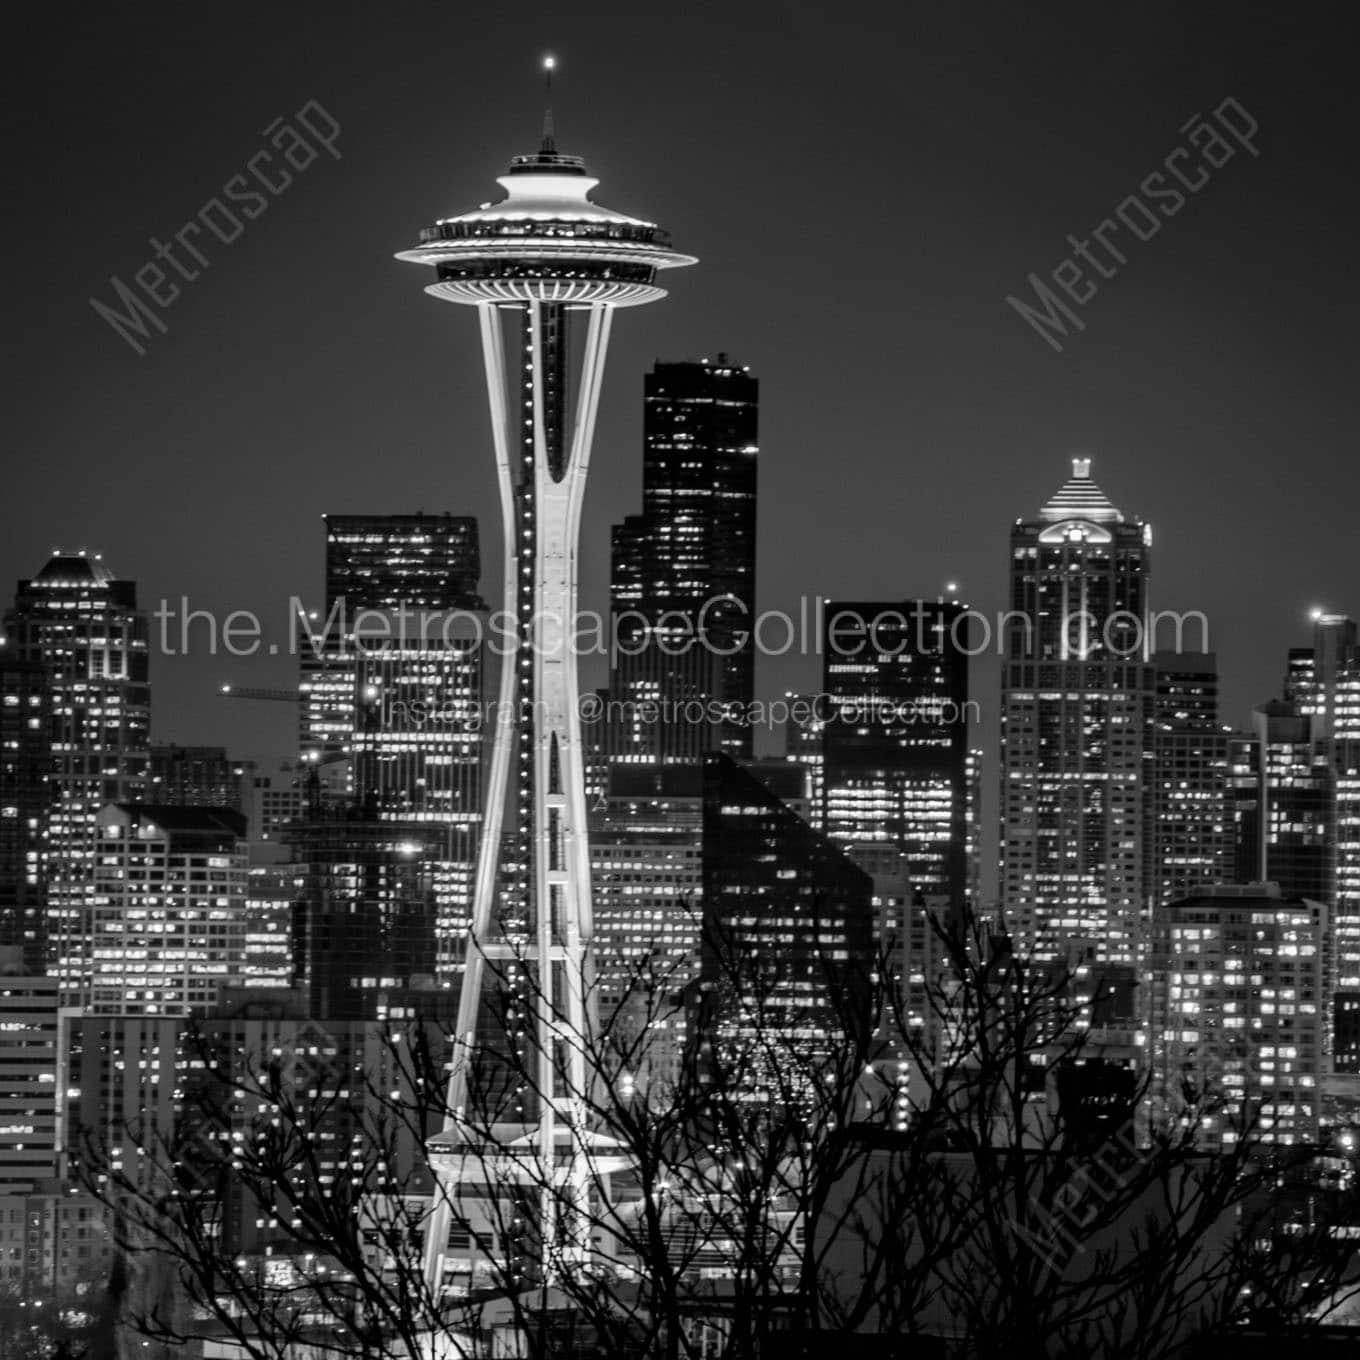 seattle space needle at night Black & White Office Art